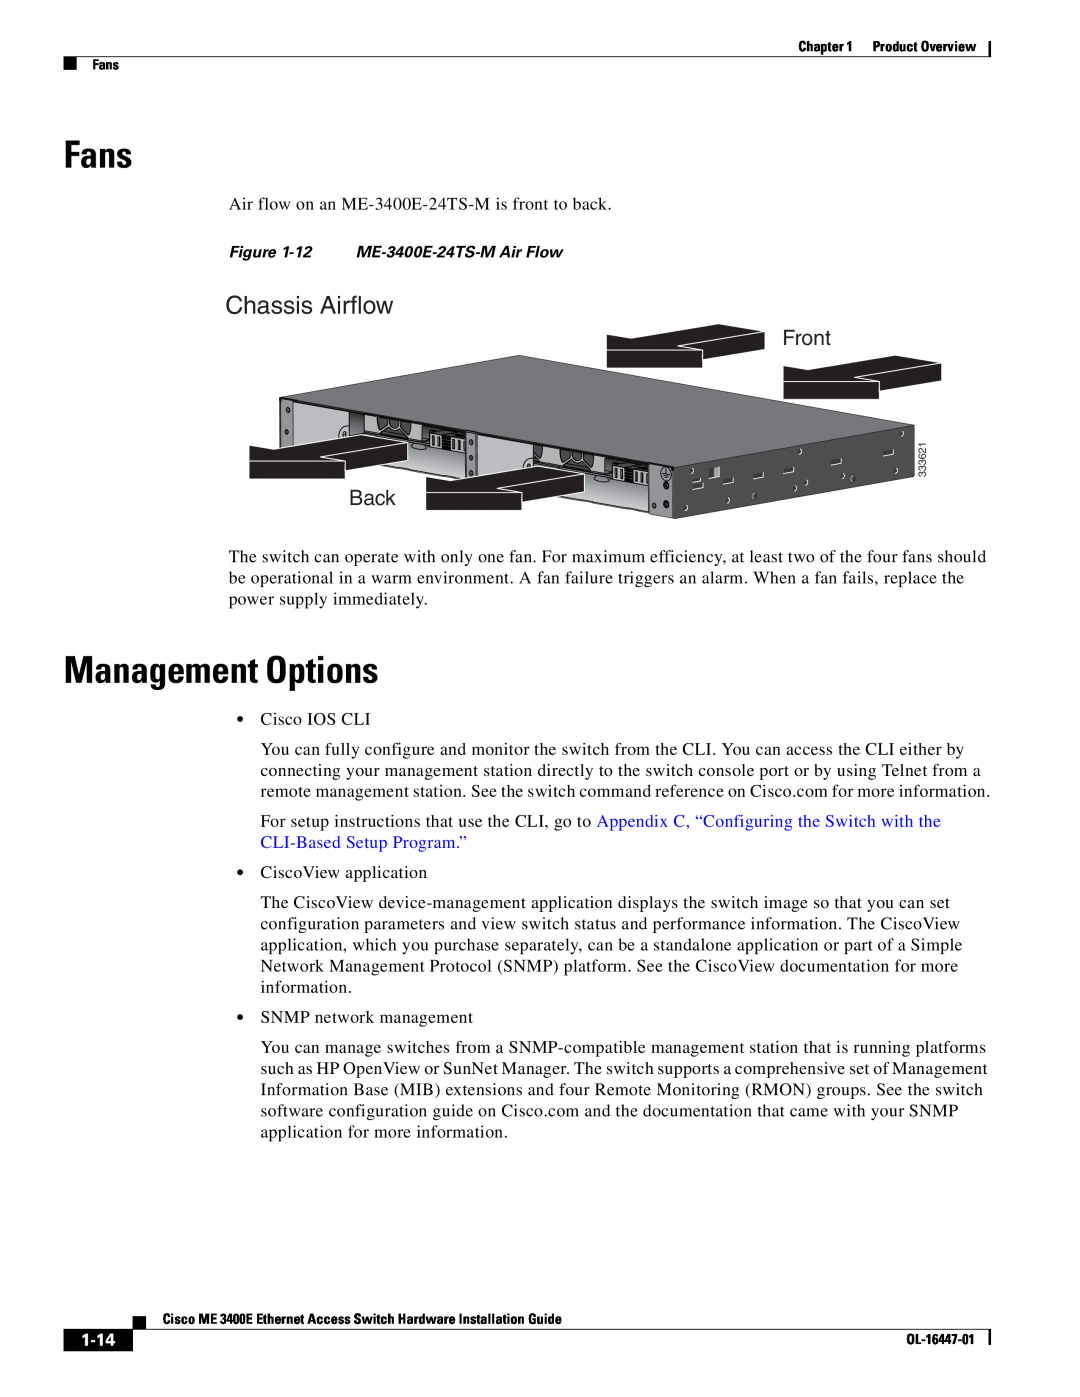 Cisco Systems OL-16447-01 manual Fans, Management Options, 1-14, Chassis Airflow, Front, Back 